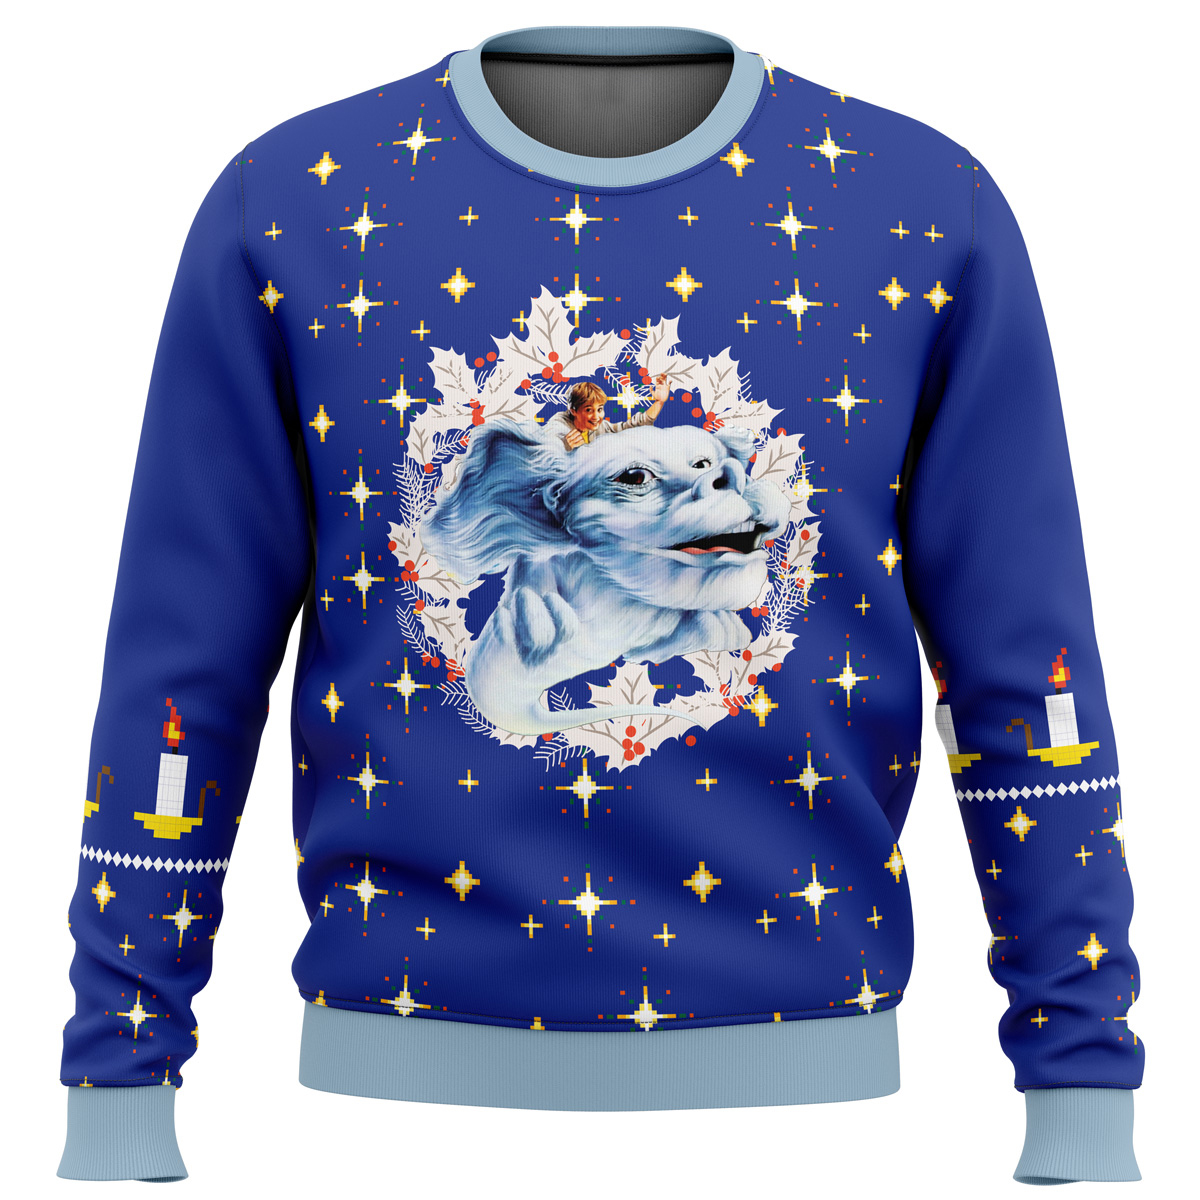 The NeverEnding Story Ugly Christmas Sweater